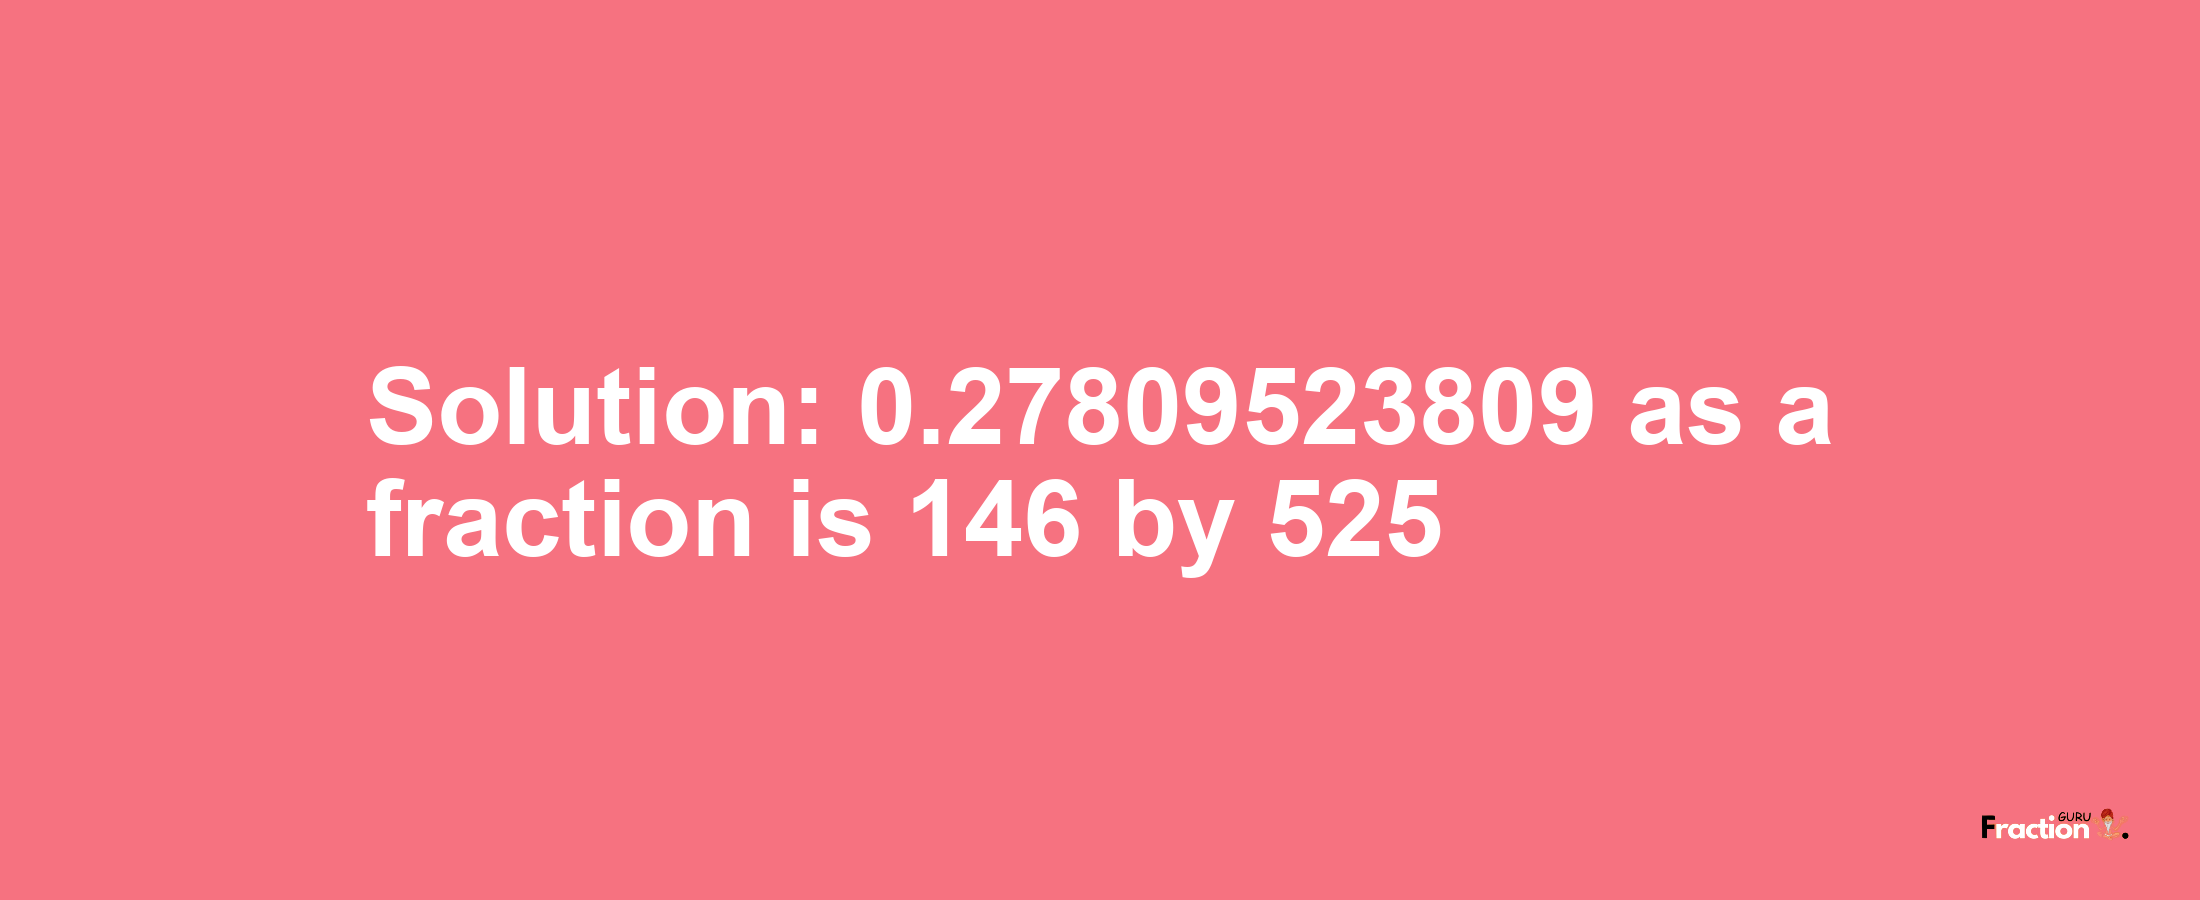 Solution:0.27809523809 as a fraction is 146/525